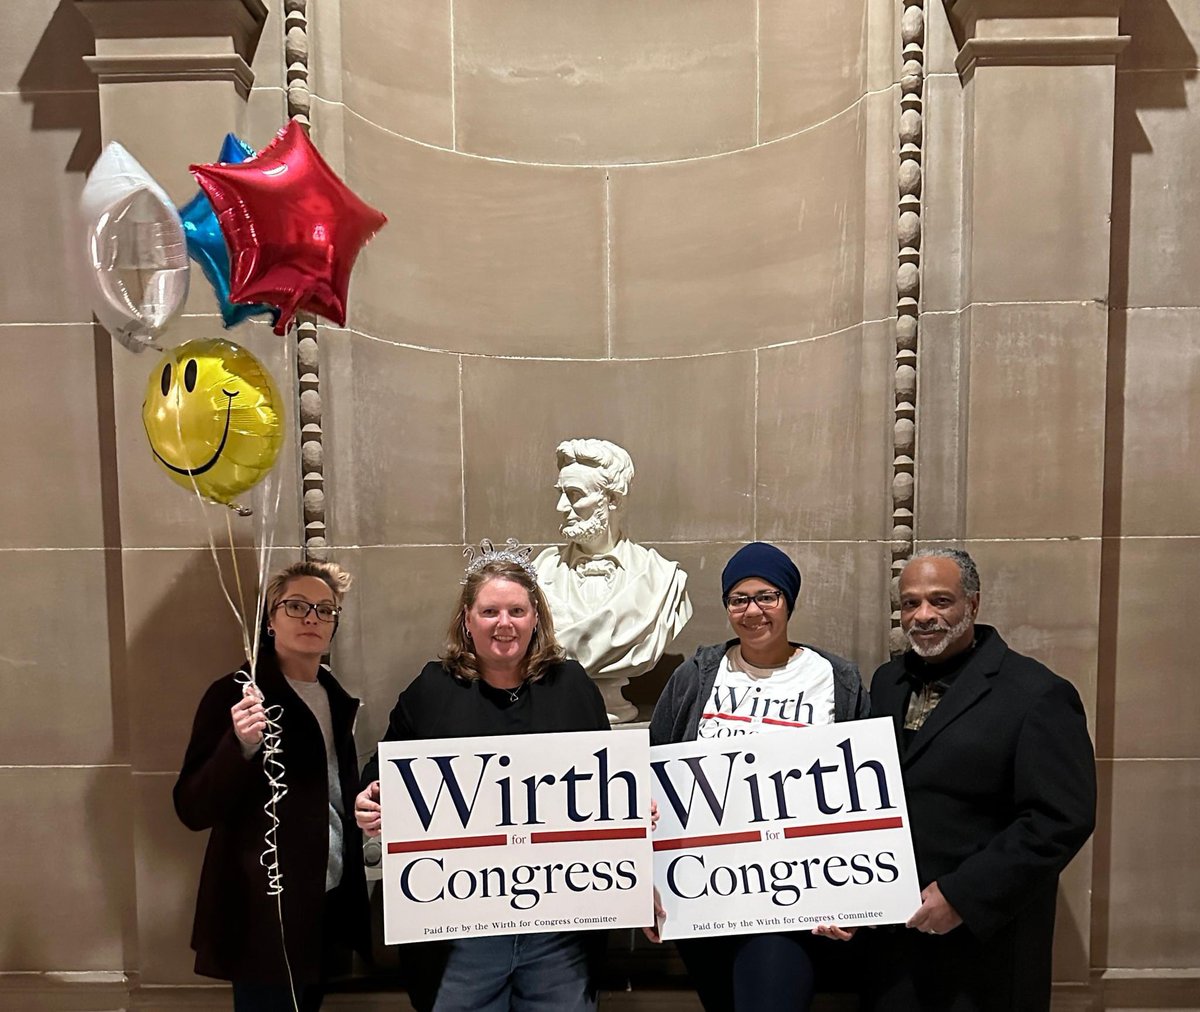 Every contribution counts! Whether it's $3 or $3300, your donation helps us amplify our voice and advocate for issues that matter to Hoosiers. Join us in our mission for a better, brighter future. Donate now! #WirthForCongress #Fundraising #Indiana6th secure.actblue.com/donate/wirth-f…